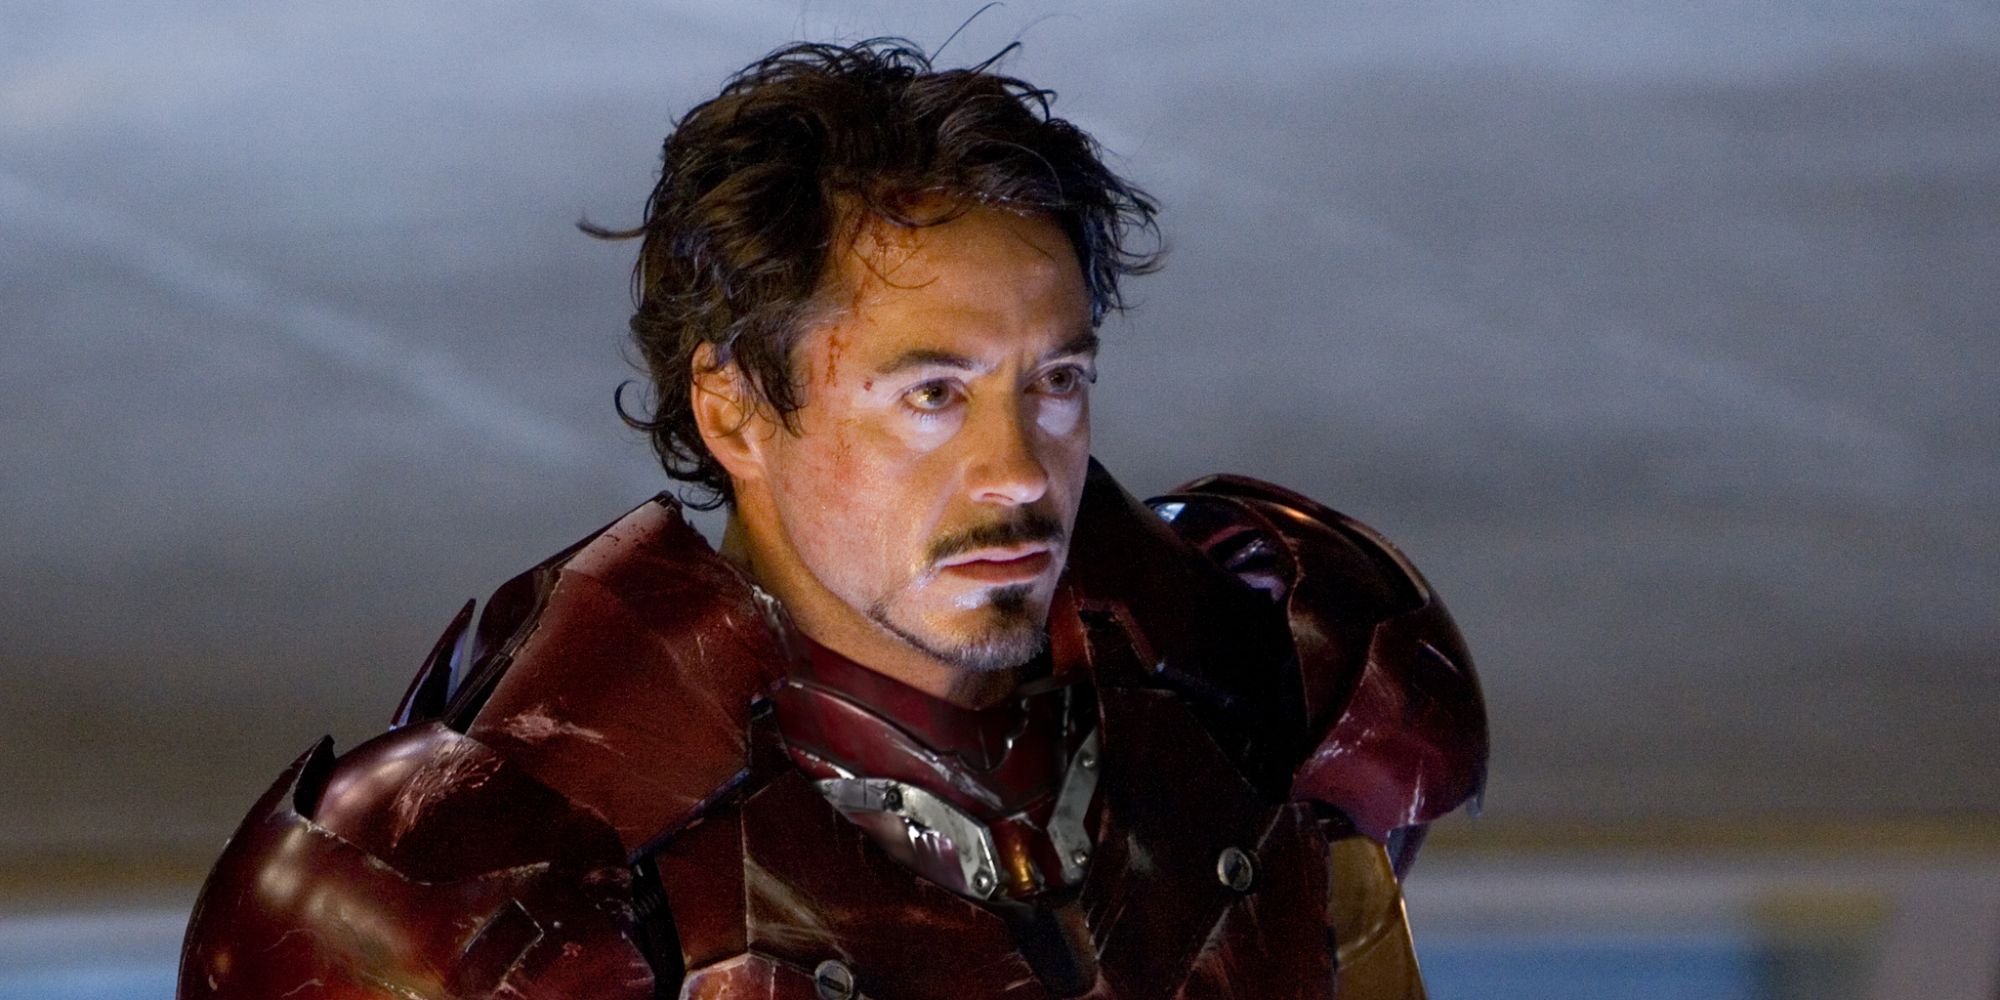 Robert Downey Jr. in his acclaimed first appearance as Iron Man.